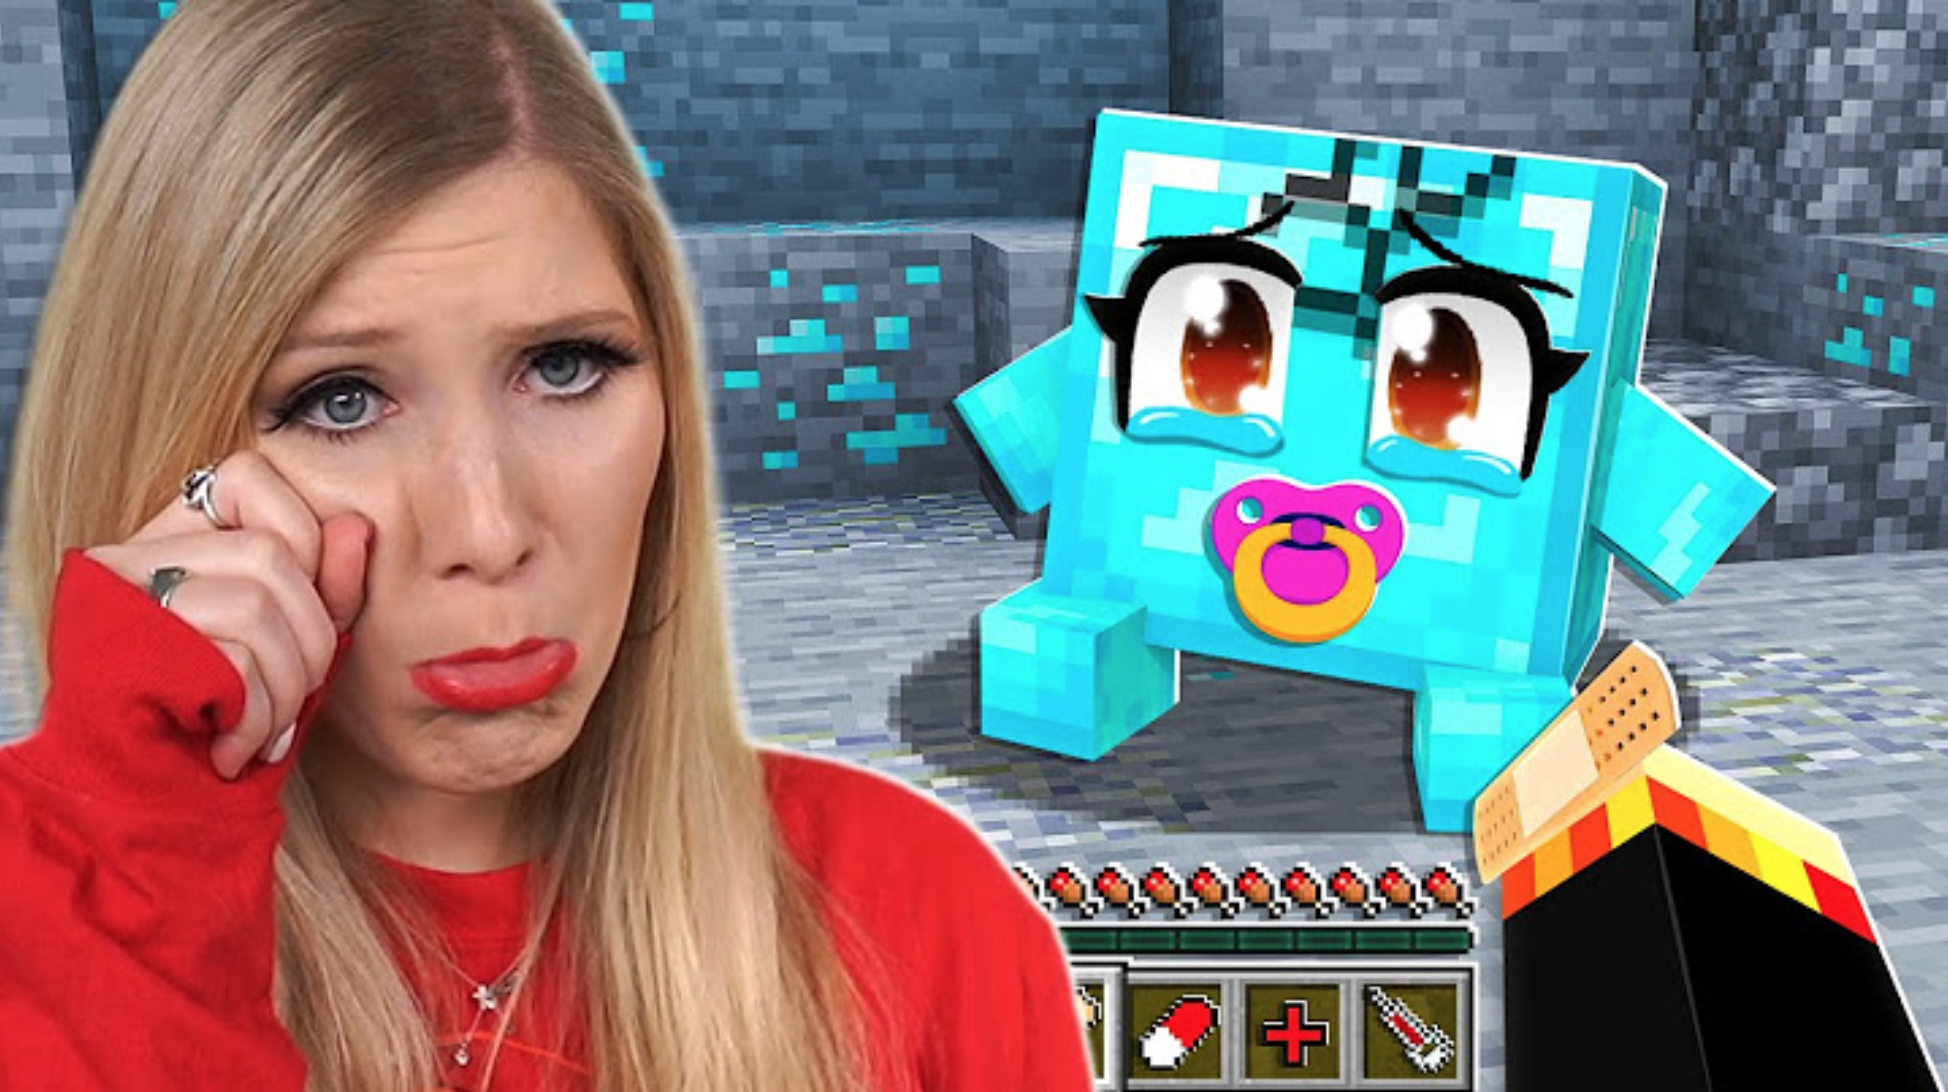 Brianna pretending to weep in front of Minecraft characters